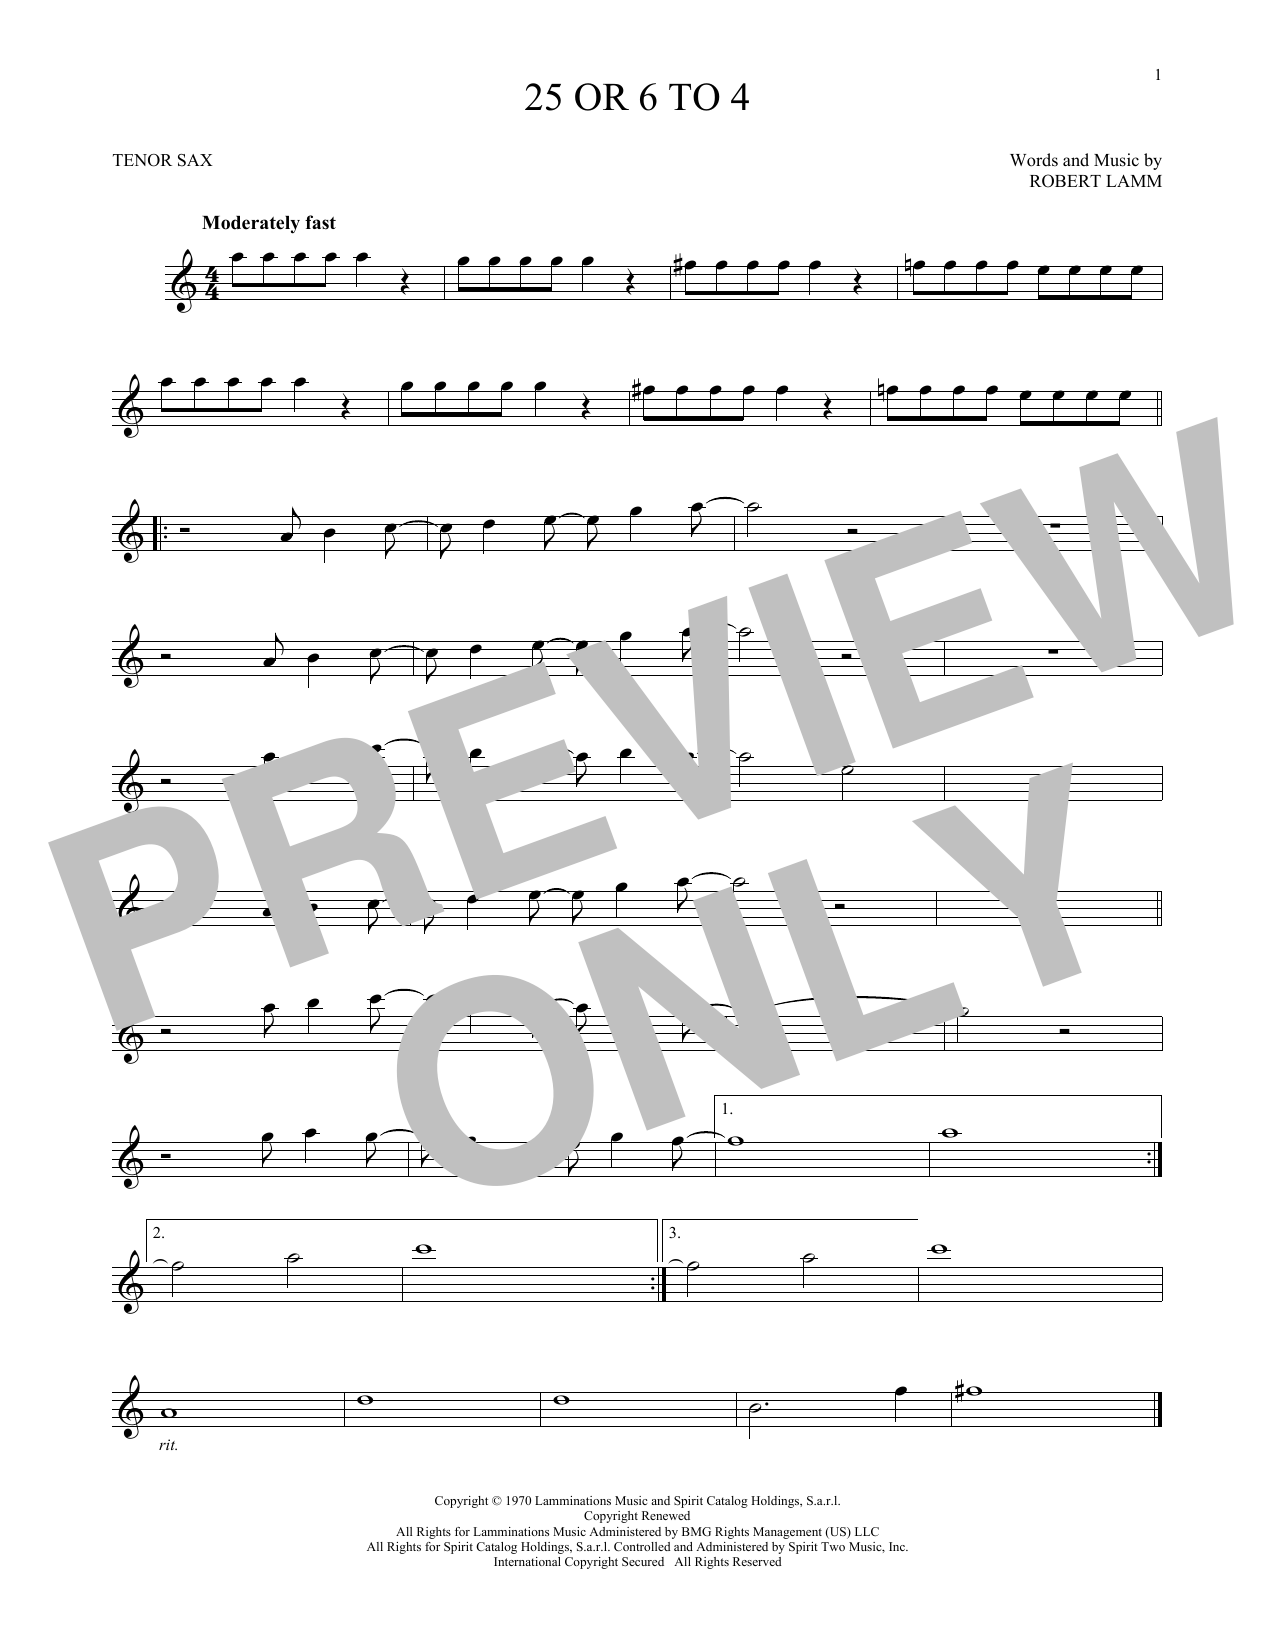 Download Chicago 25 Or 6 To 4 Sheet Music